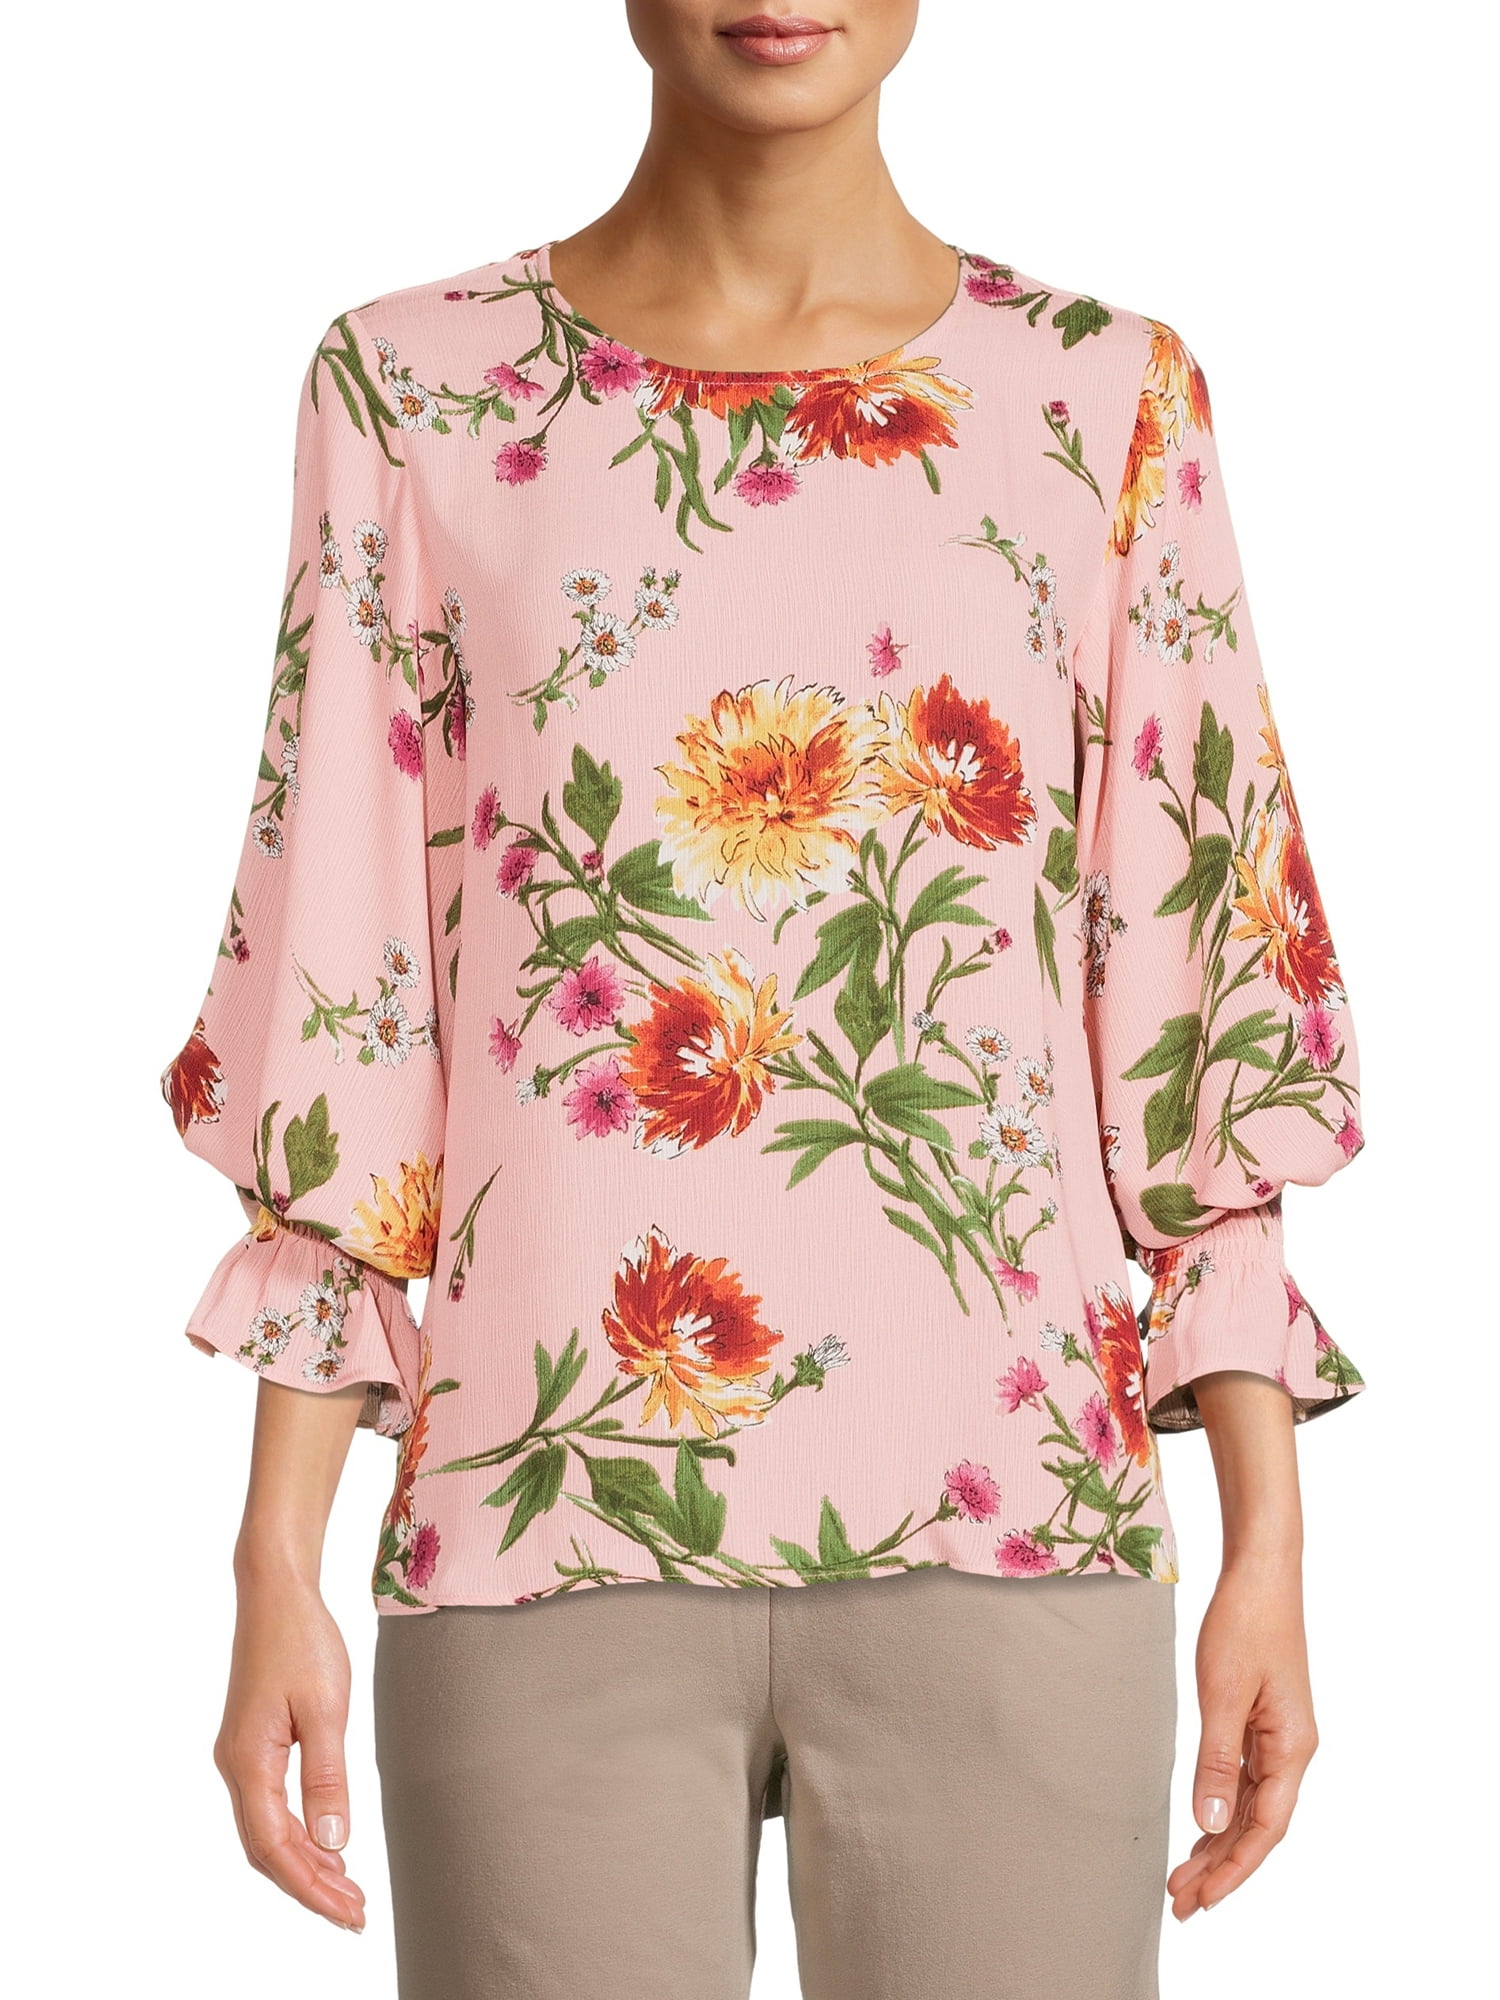 Status by Chenault Women's Long Sleeve Floral Blouse - Walmart.com